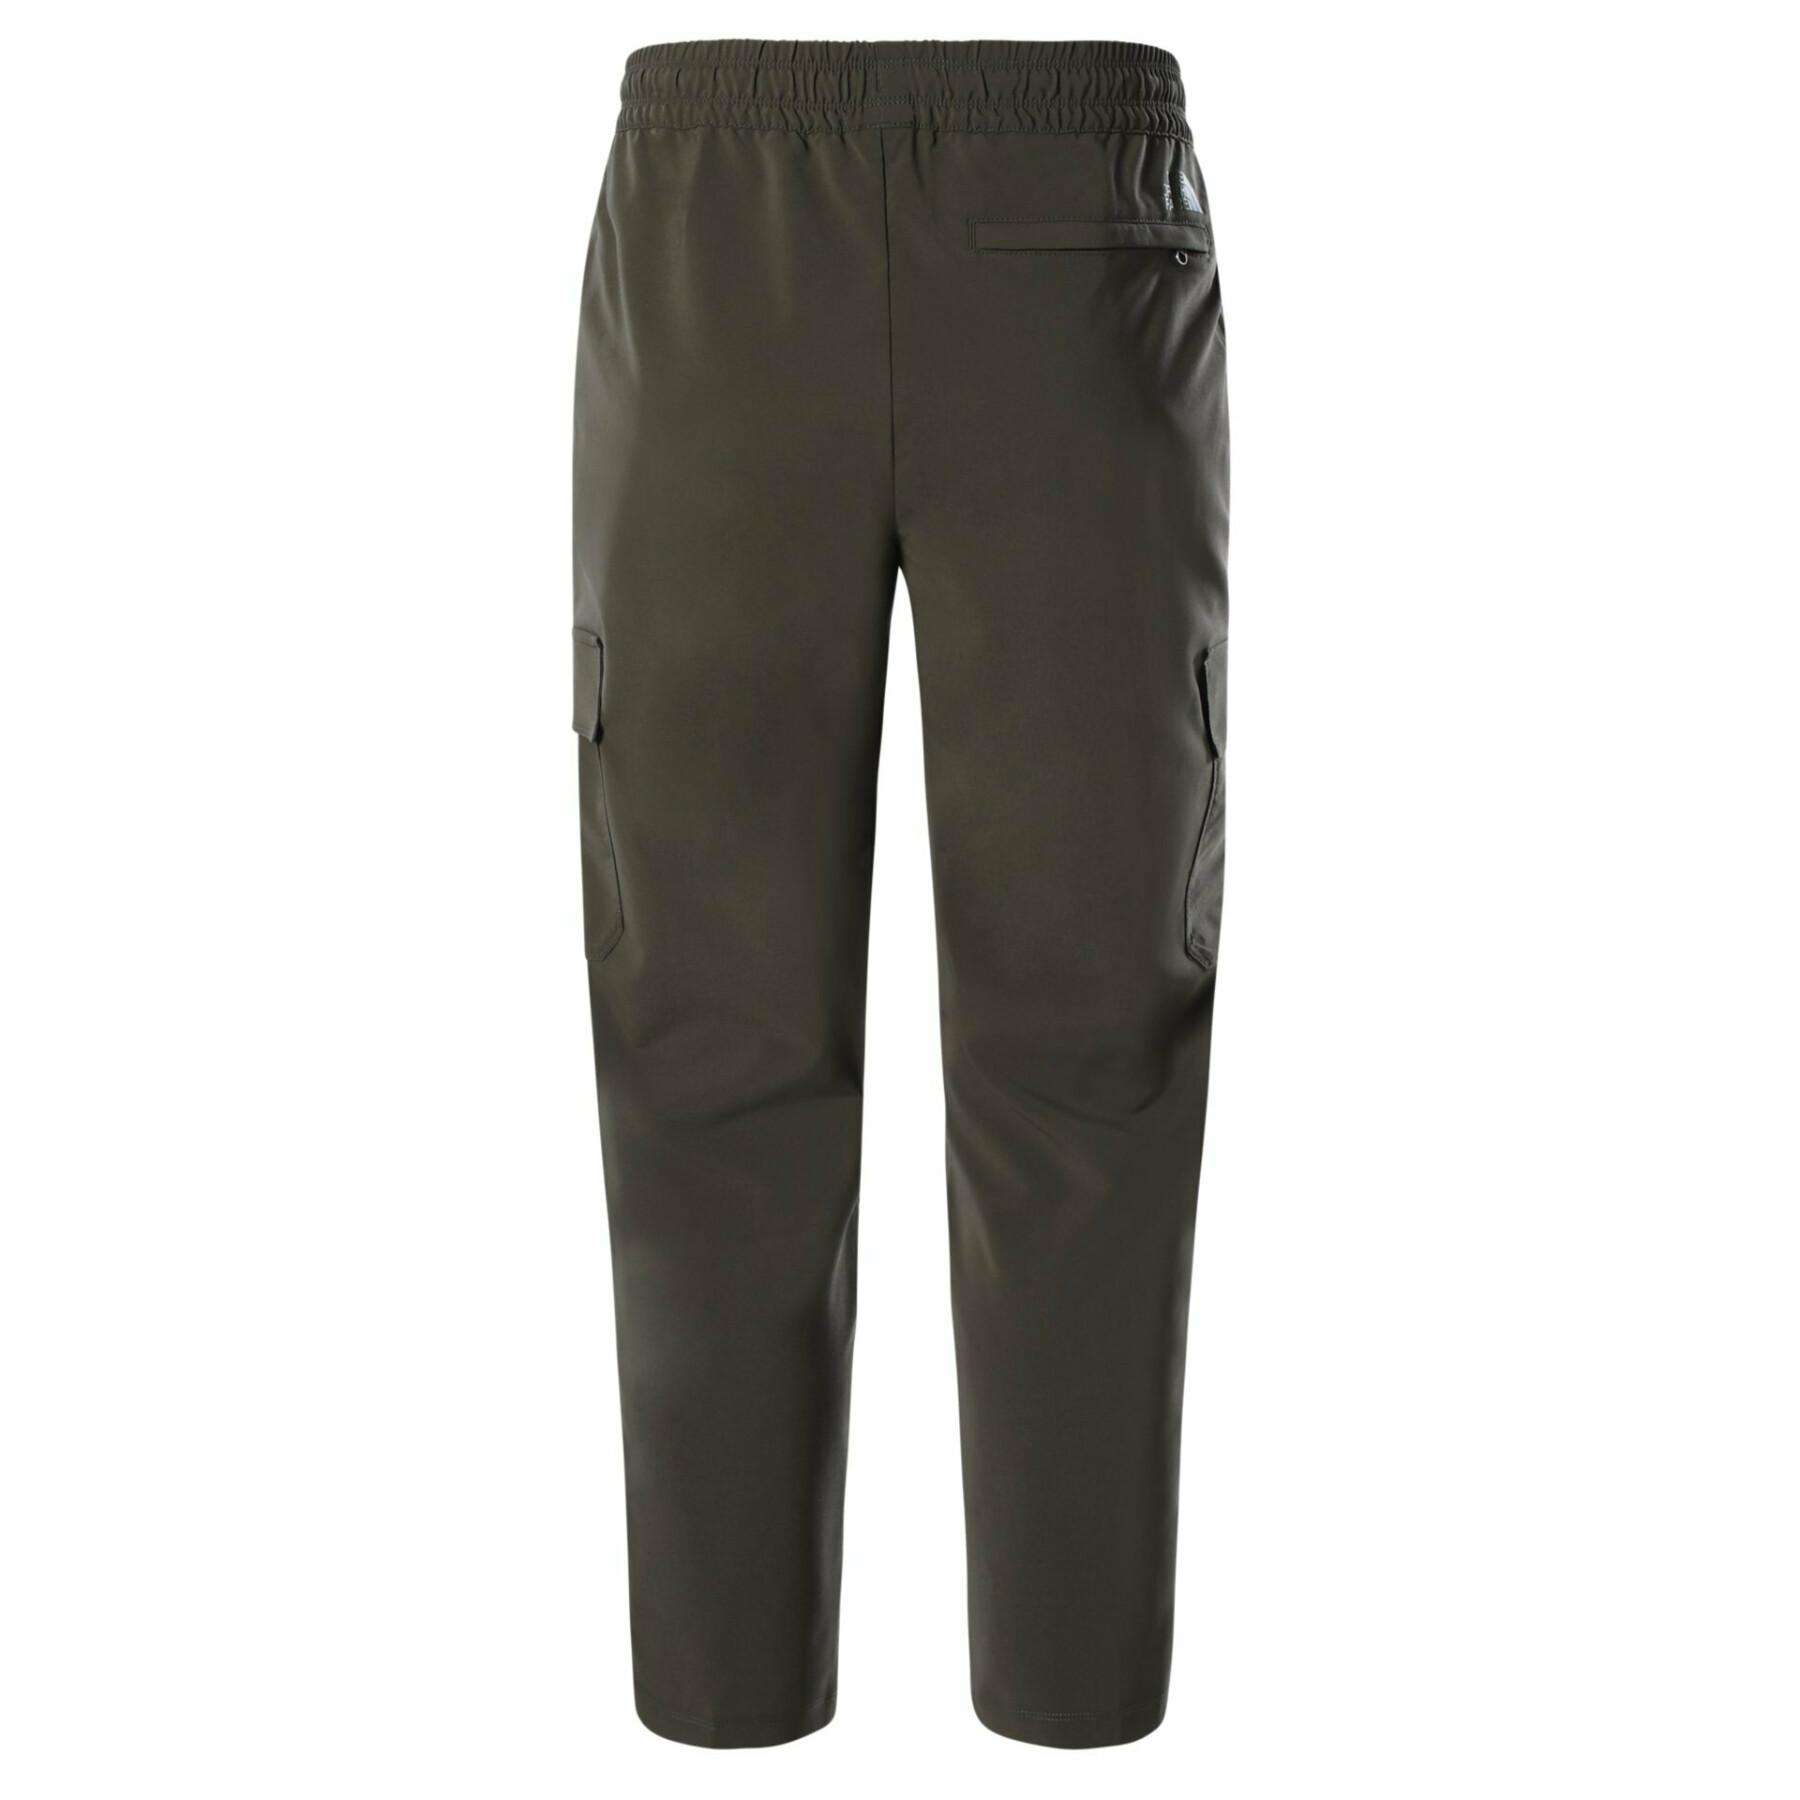 Women's cargo pants The North Face Never Stop Wearing